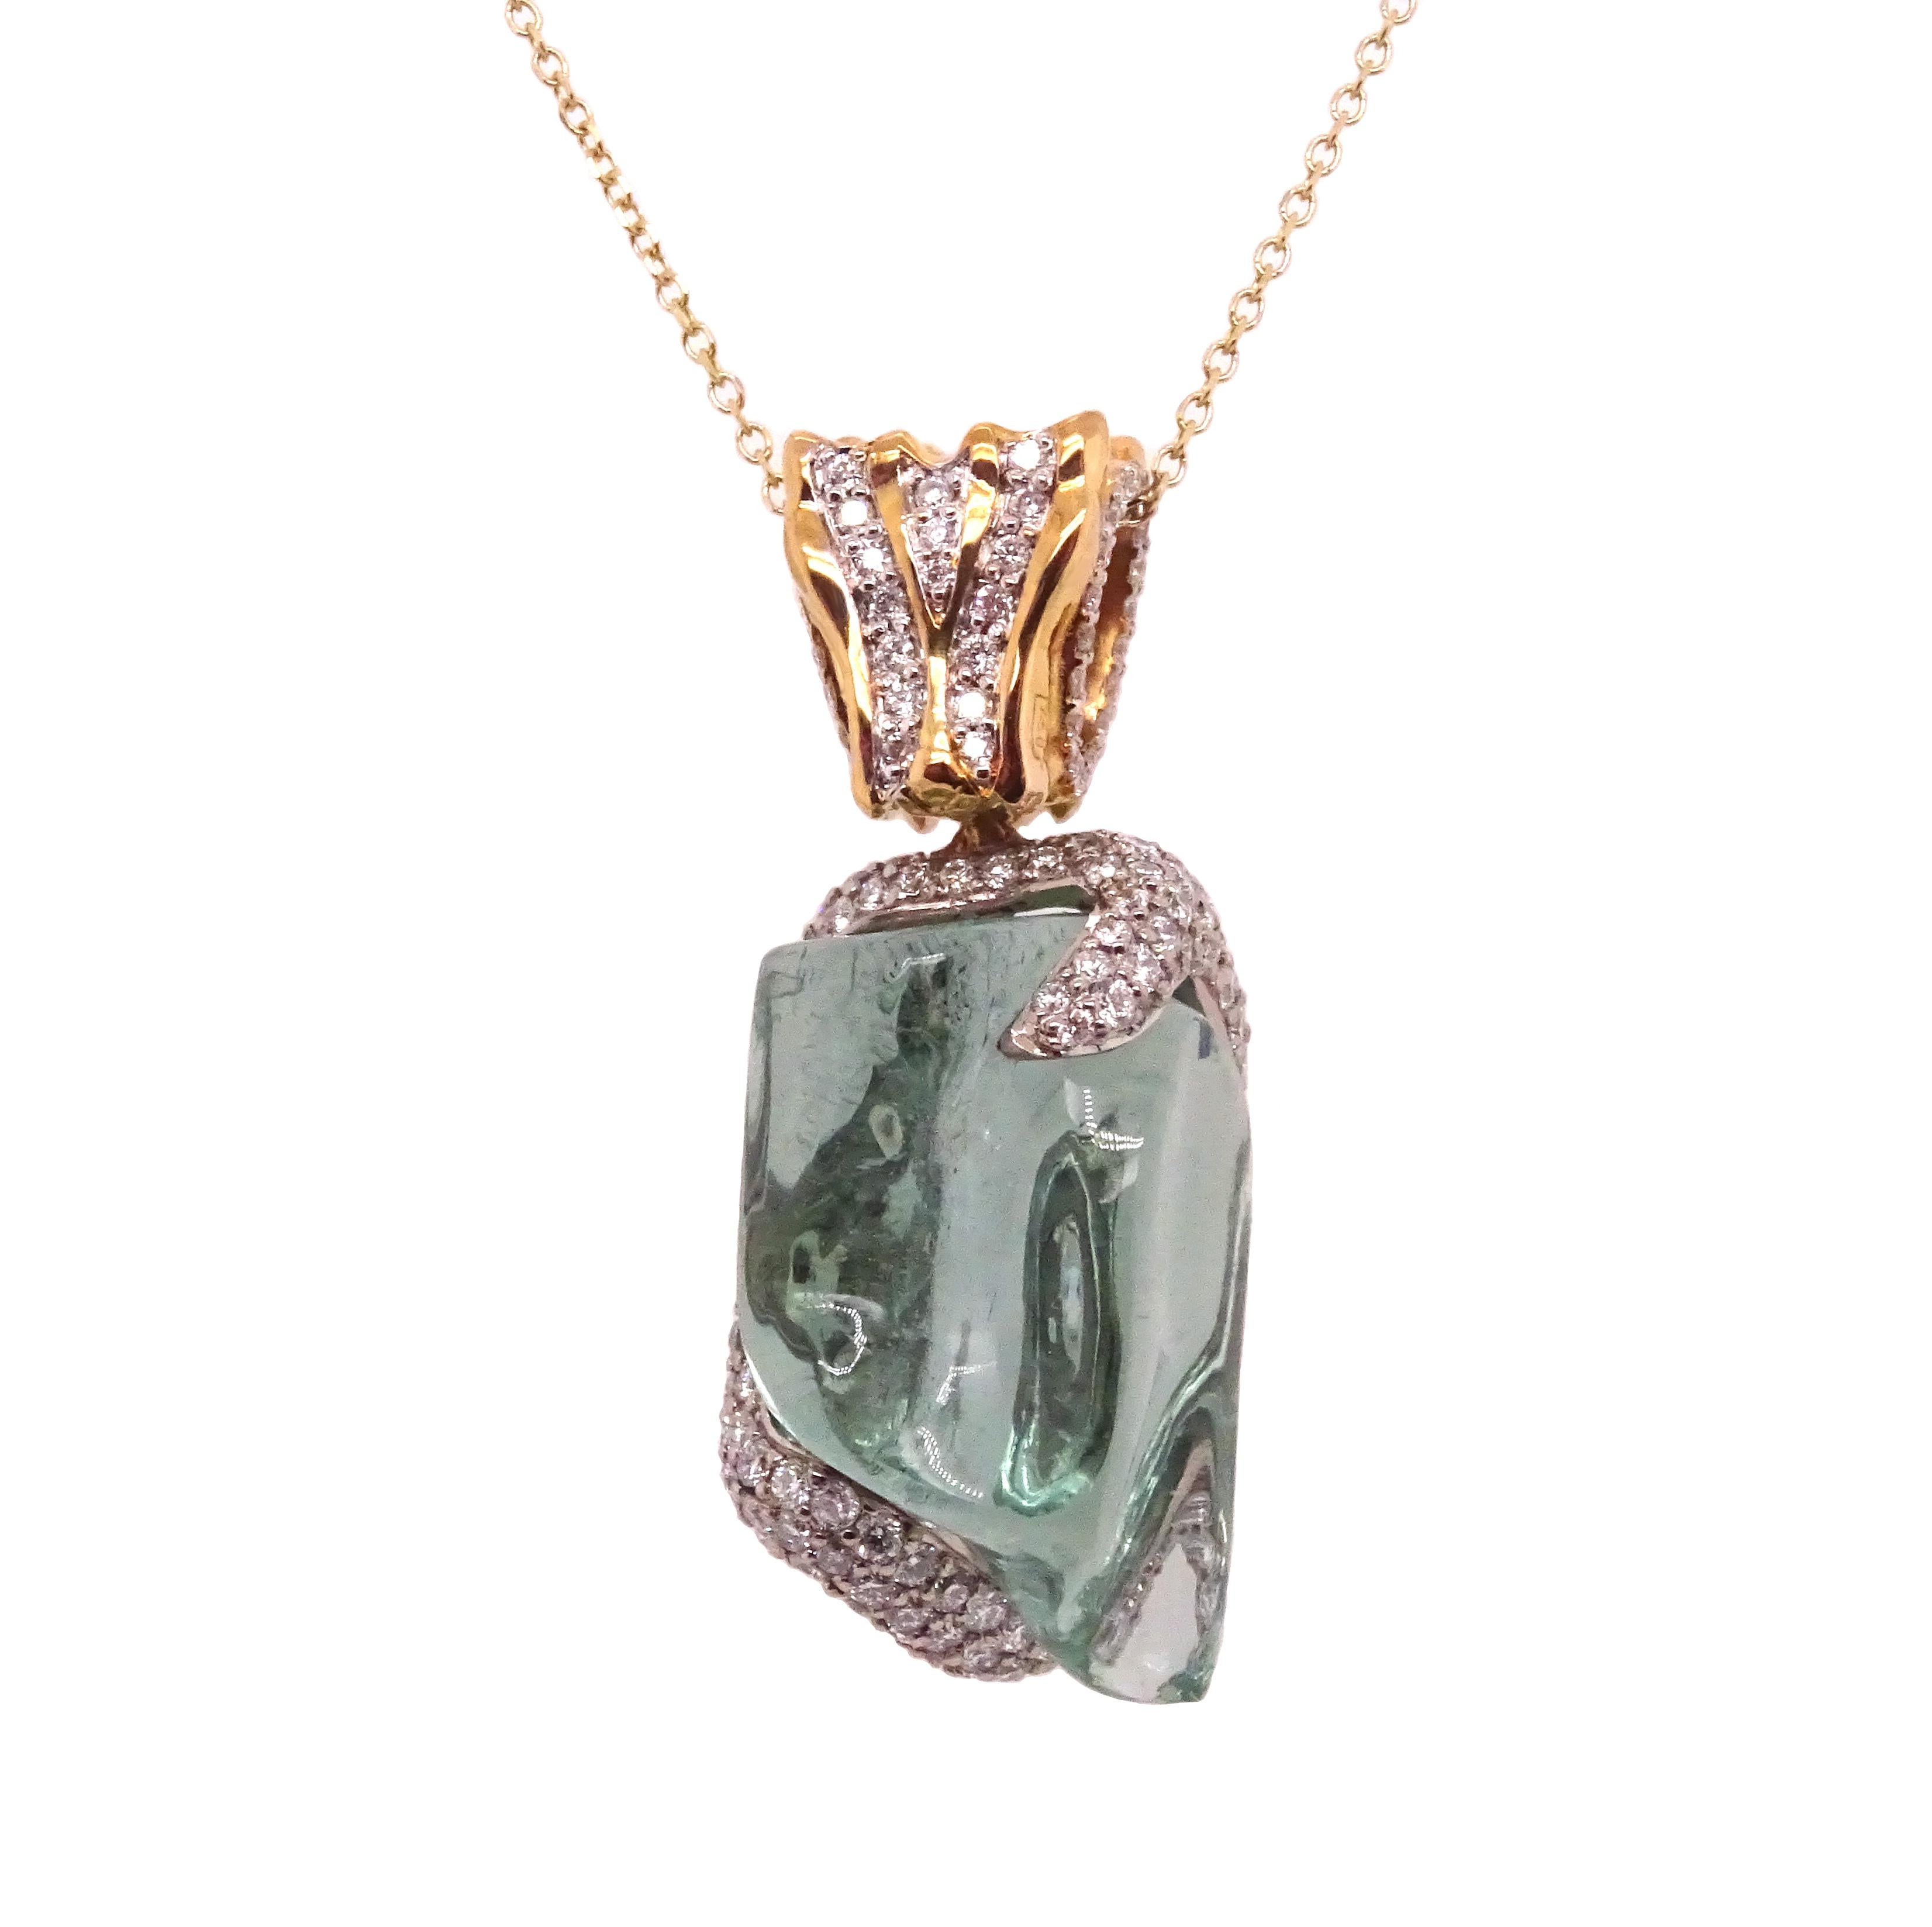 Organic collection by VOTIVE.

Discover the enchanting beauty of VOTIVE's Organic Collection, featuring a mesmerizing 18K yellow gold pendant adorned with brilliant white diamonds and a captivating uncut aquamarine gemstone. The organic allure of